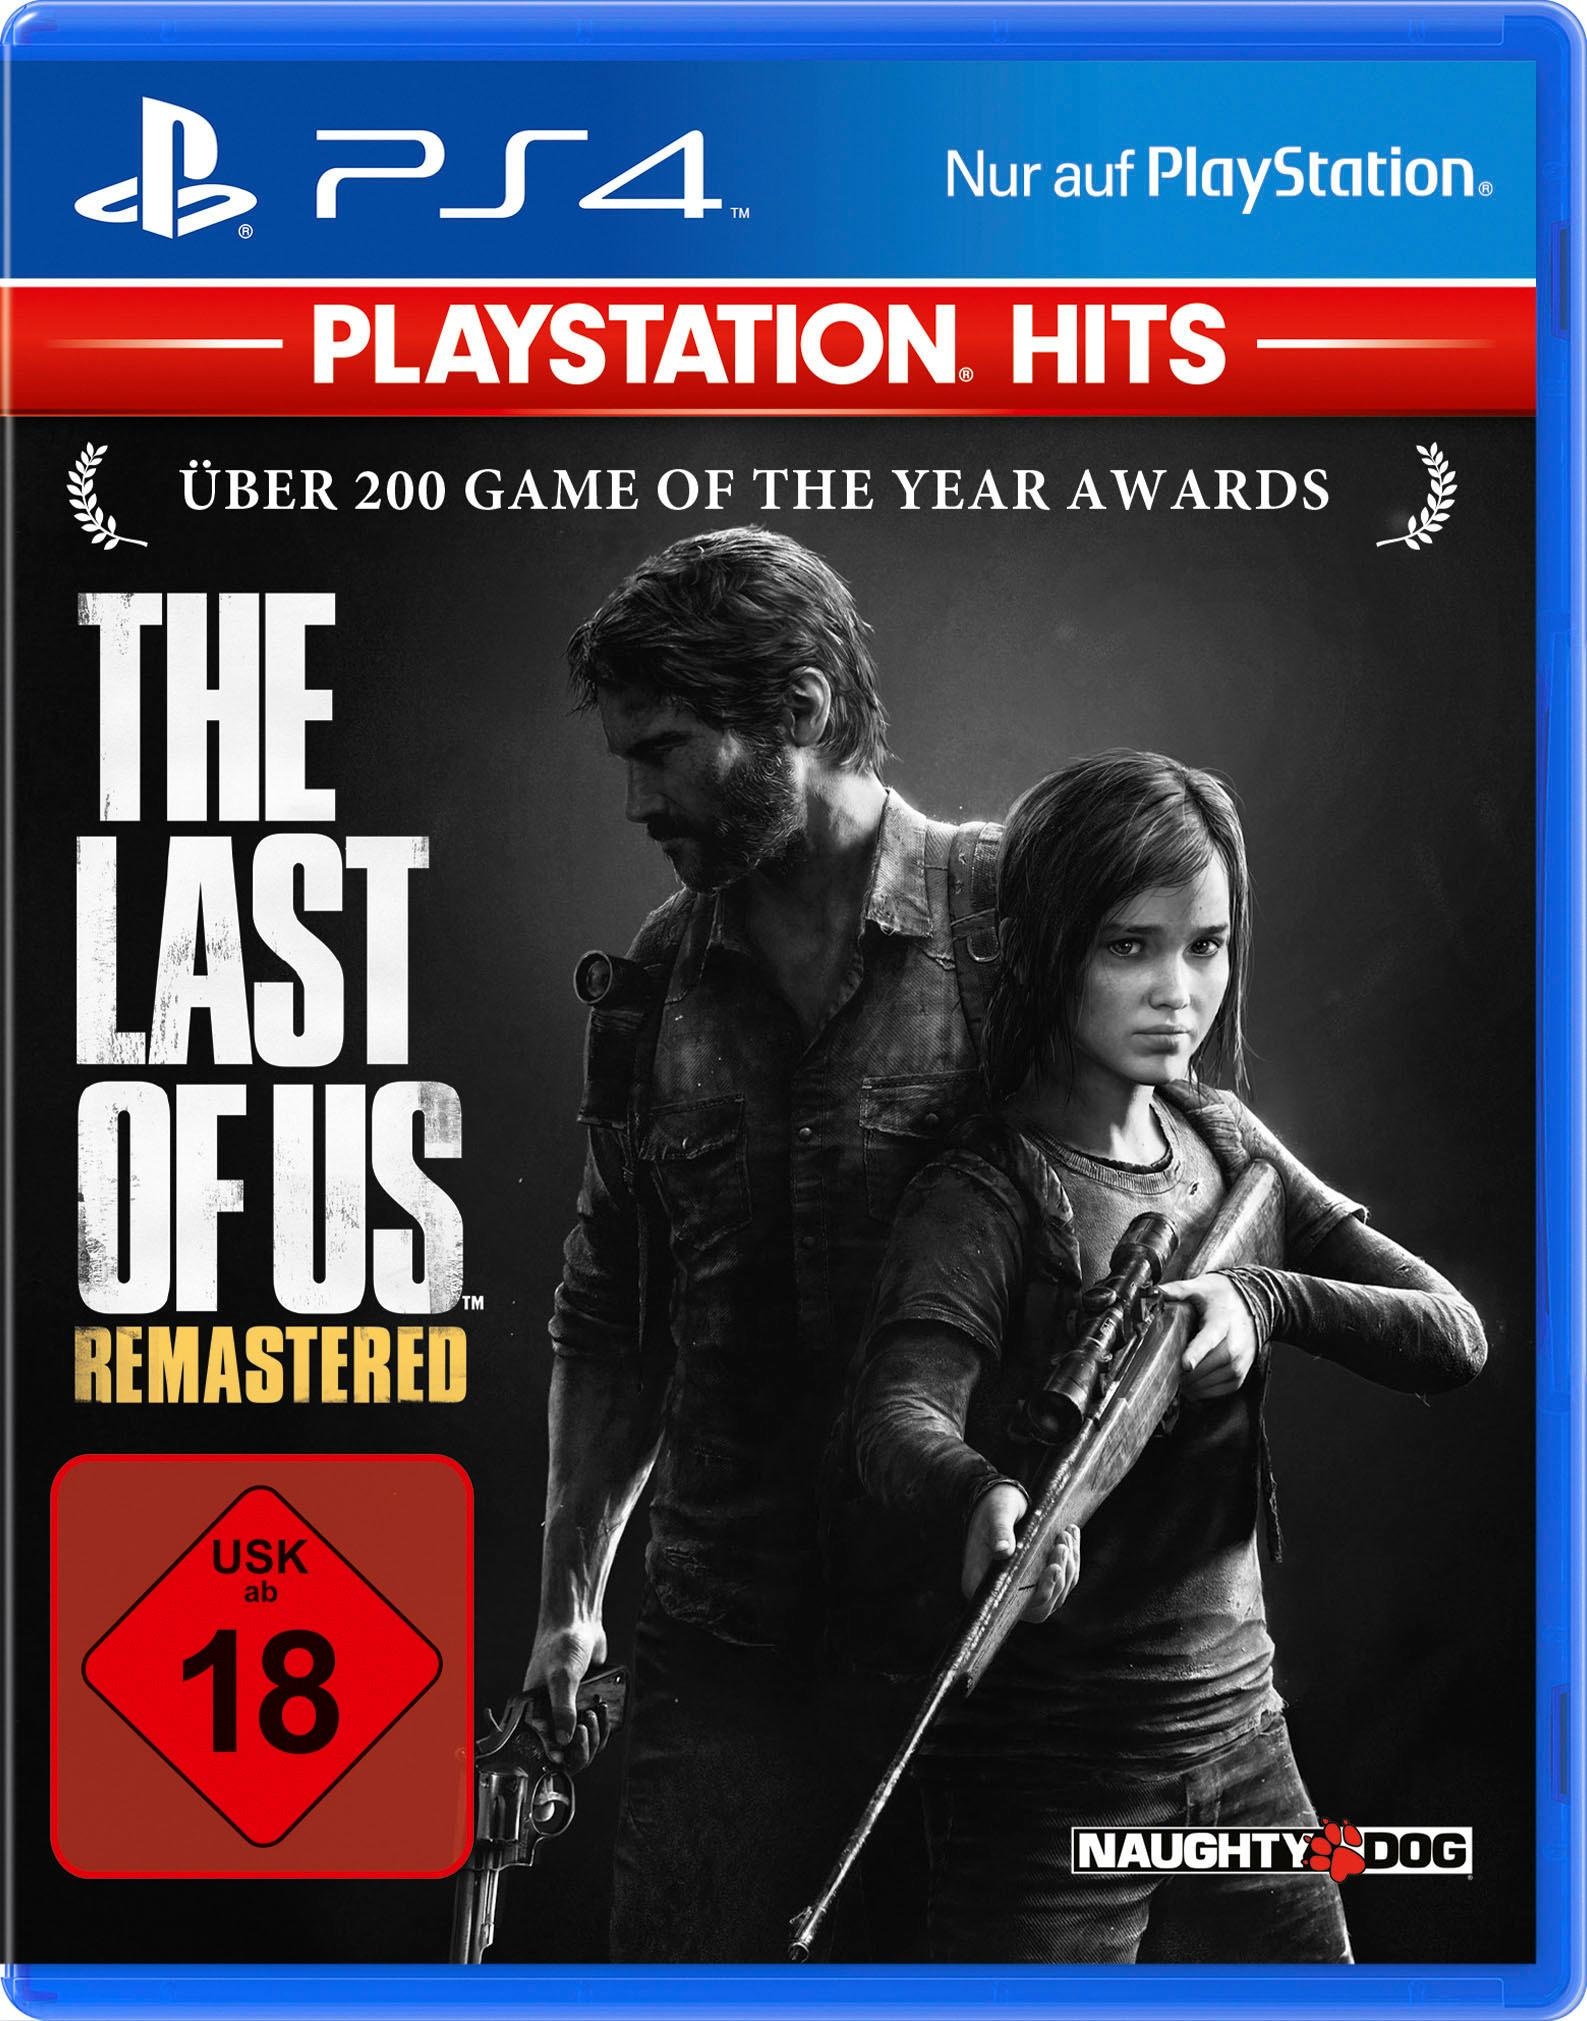 Spielesoftware »The Last of Us Remastered«, PlayStation 4, Software Pyramide